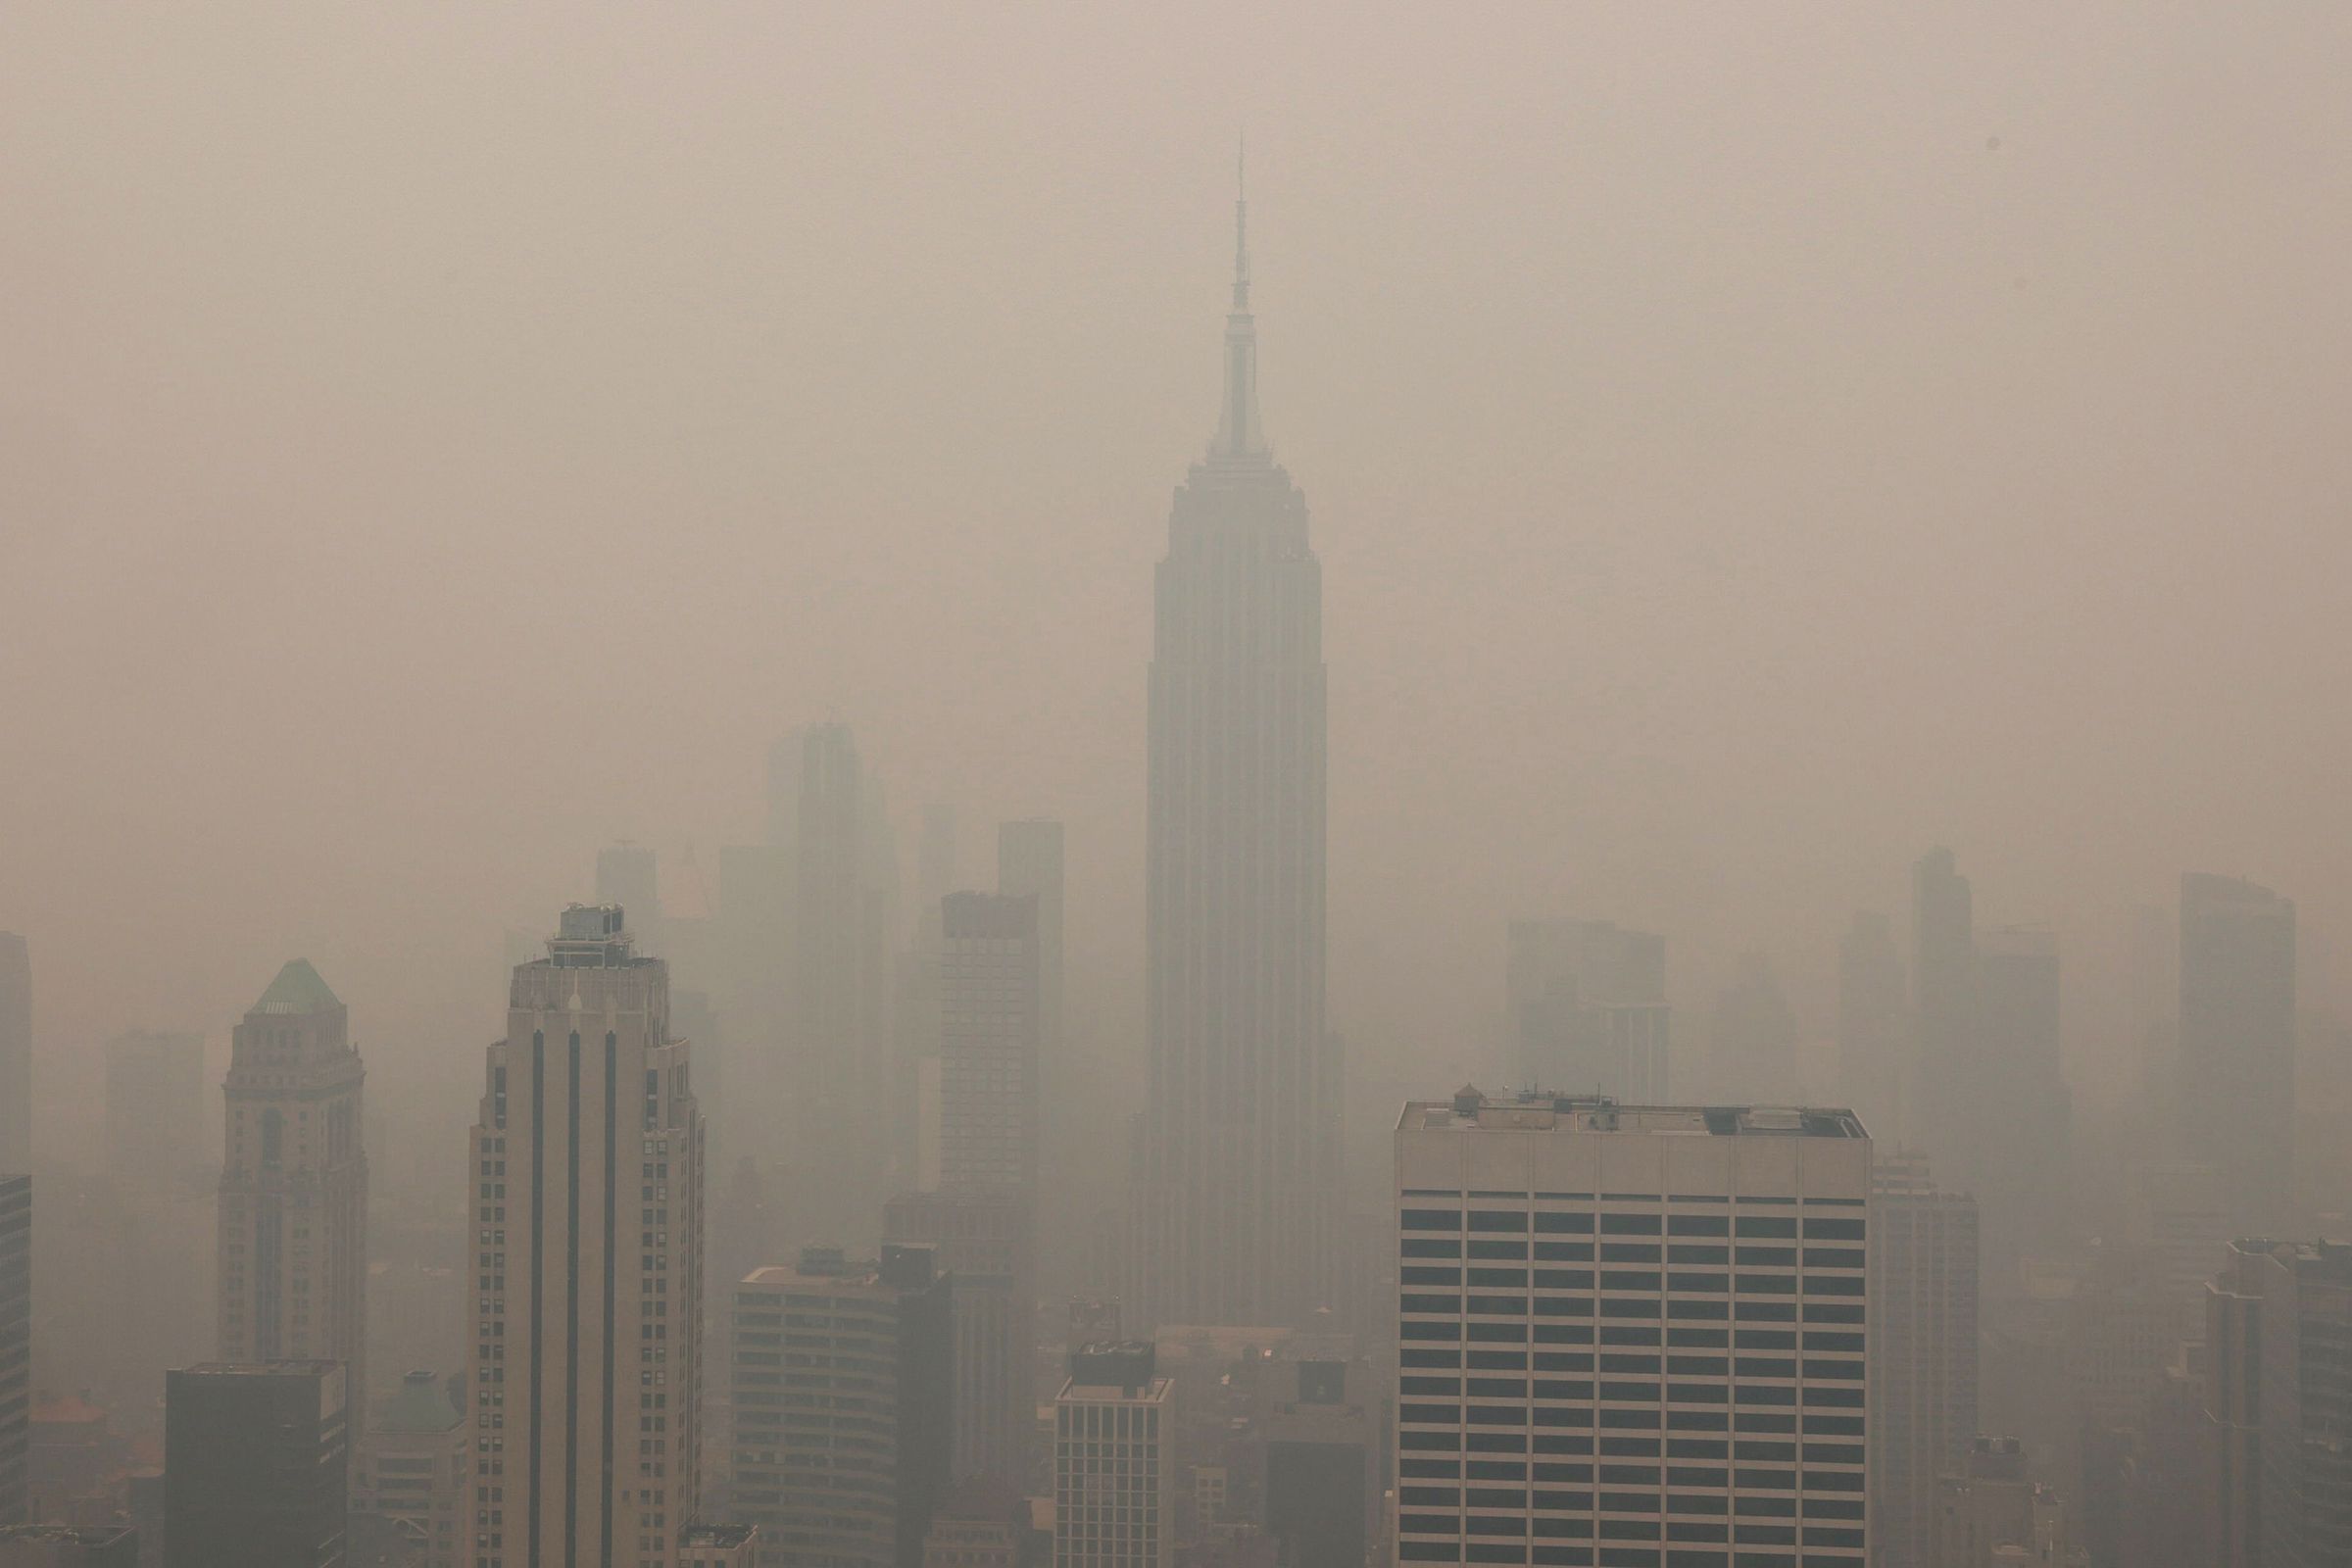 Manhattan’s skyscrapers, including the Empire State Building, are barely visible in a thick haze of smoke.